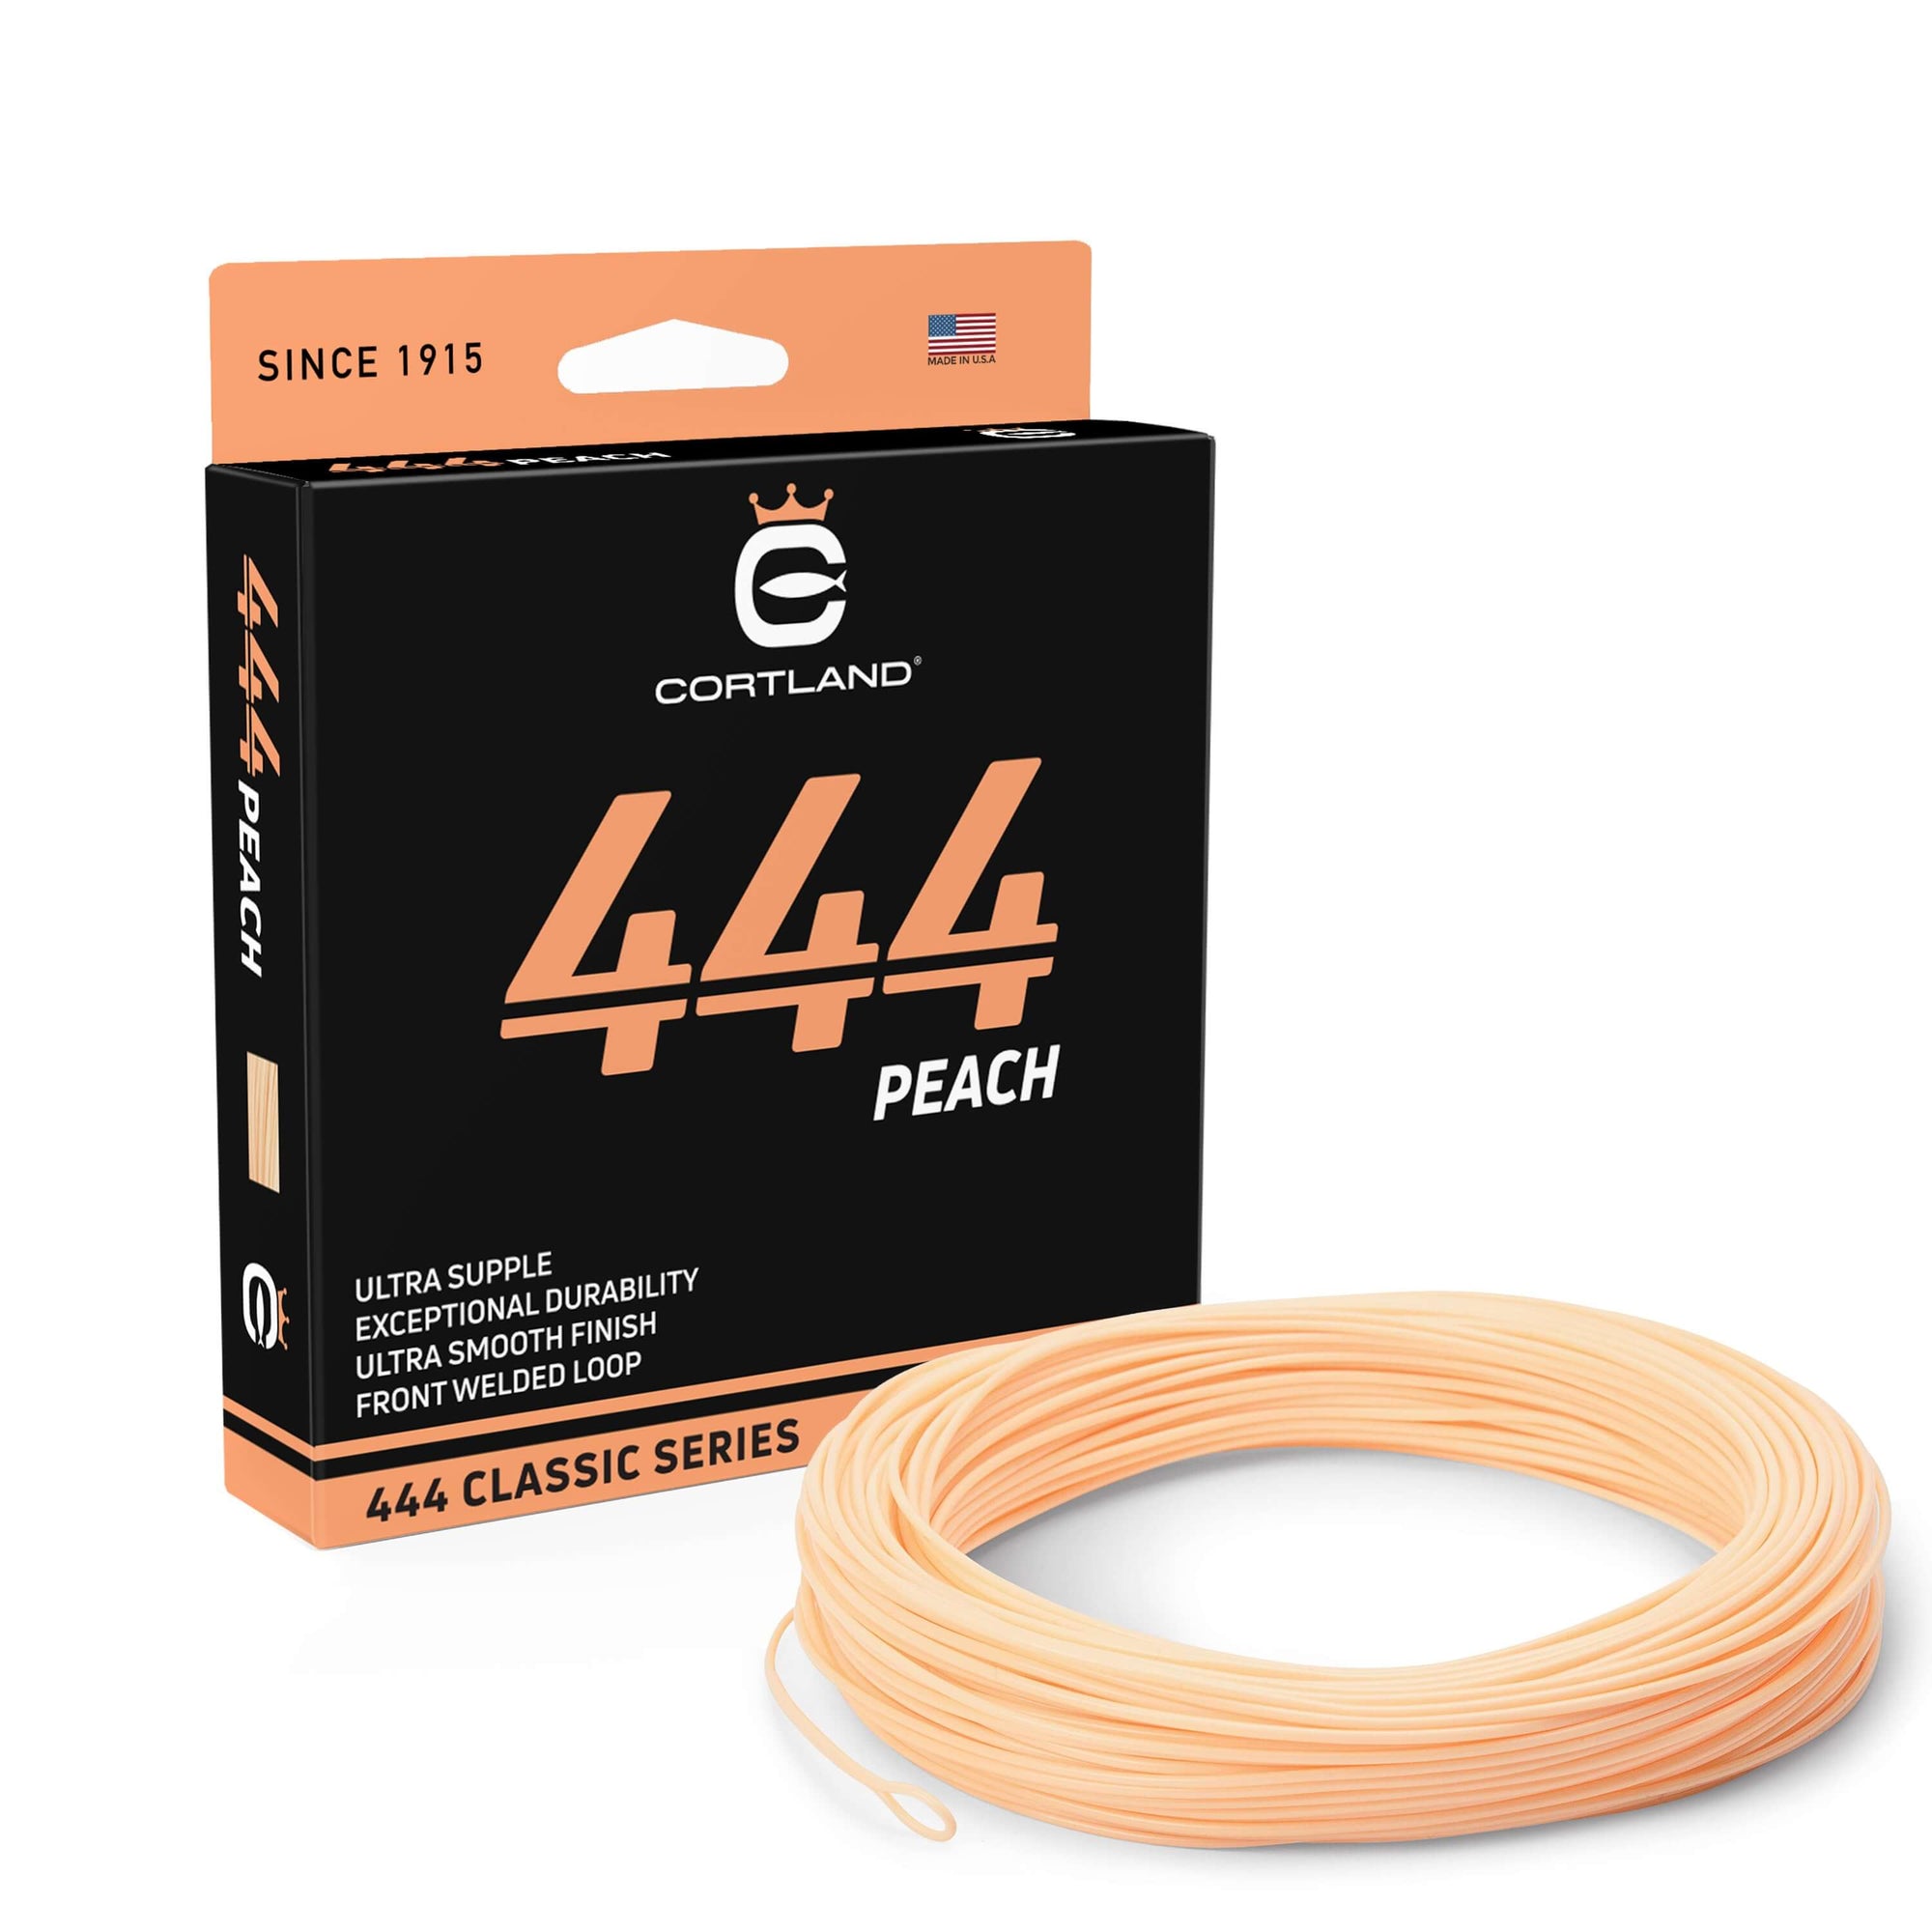 444 Series Peach Fly Line Box and coil. The coil is peach. The box is black and peach. 